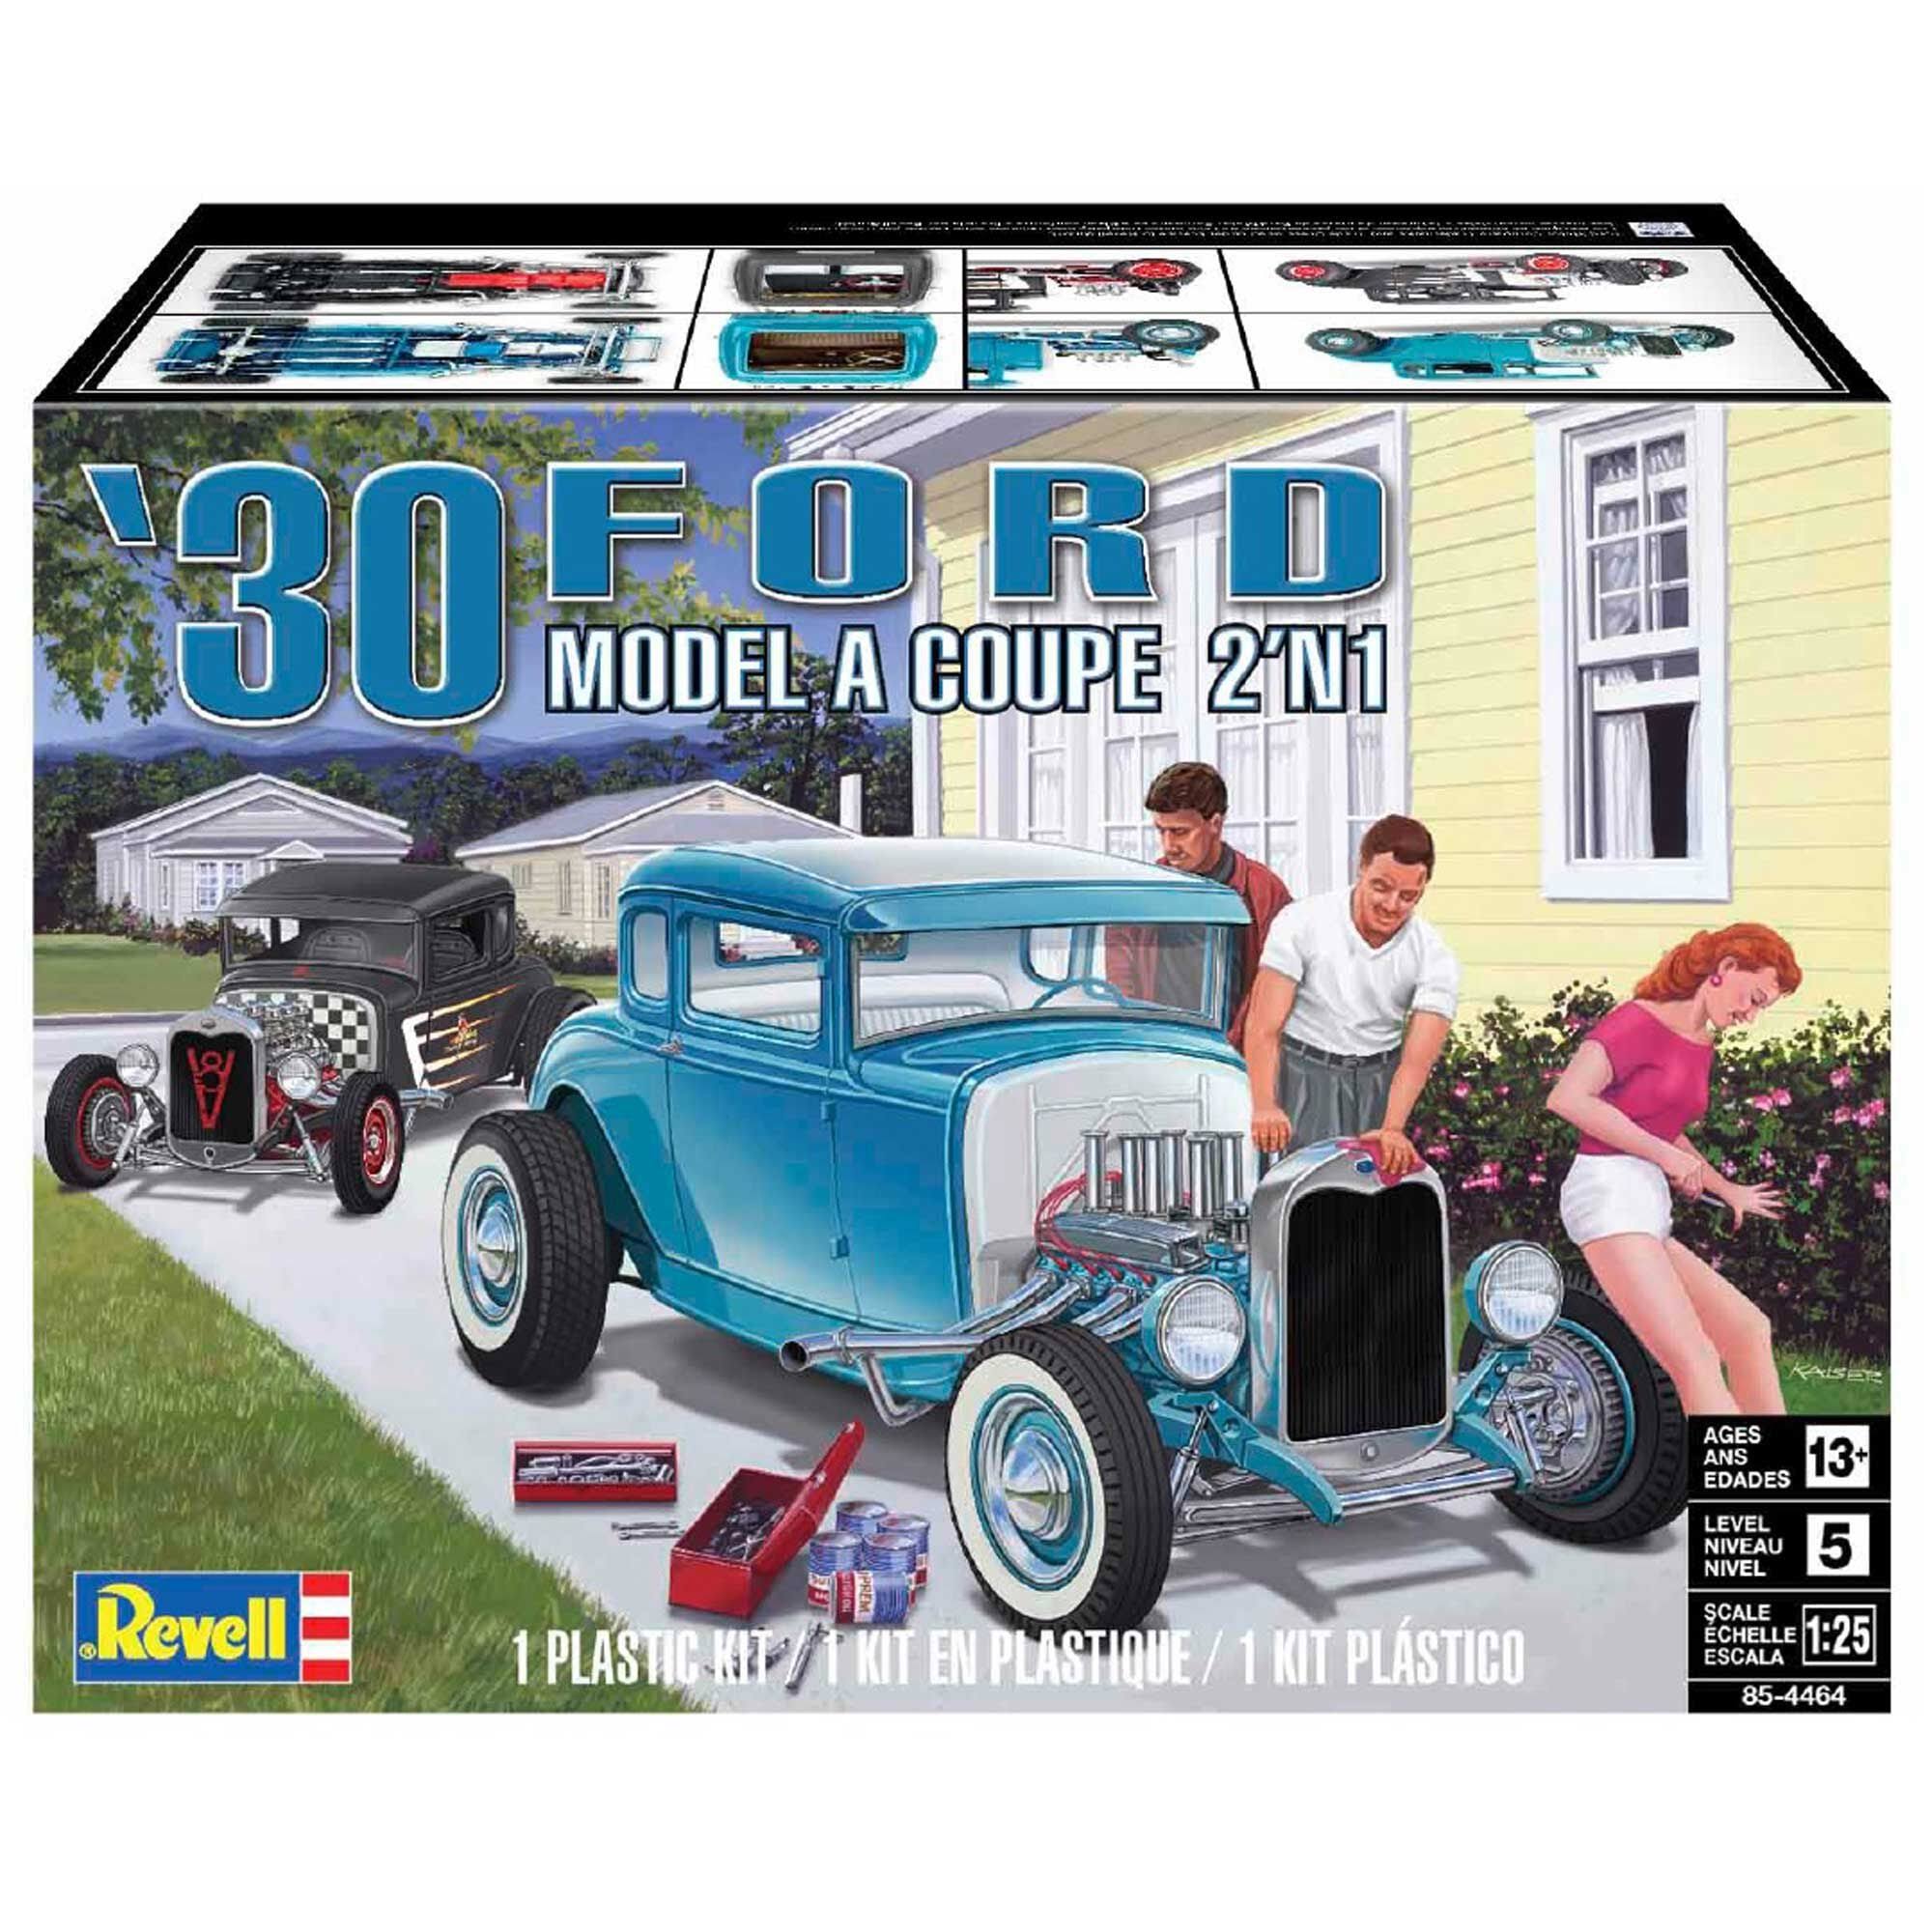 REVELL USA '30 Ford Model A Coupe 2'n1 (85-4464) 1:25 Scale Car Plastic Model Kit